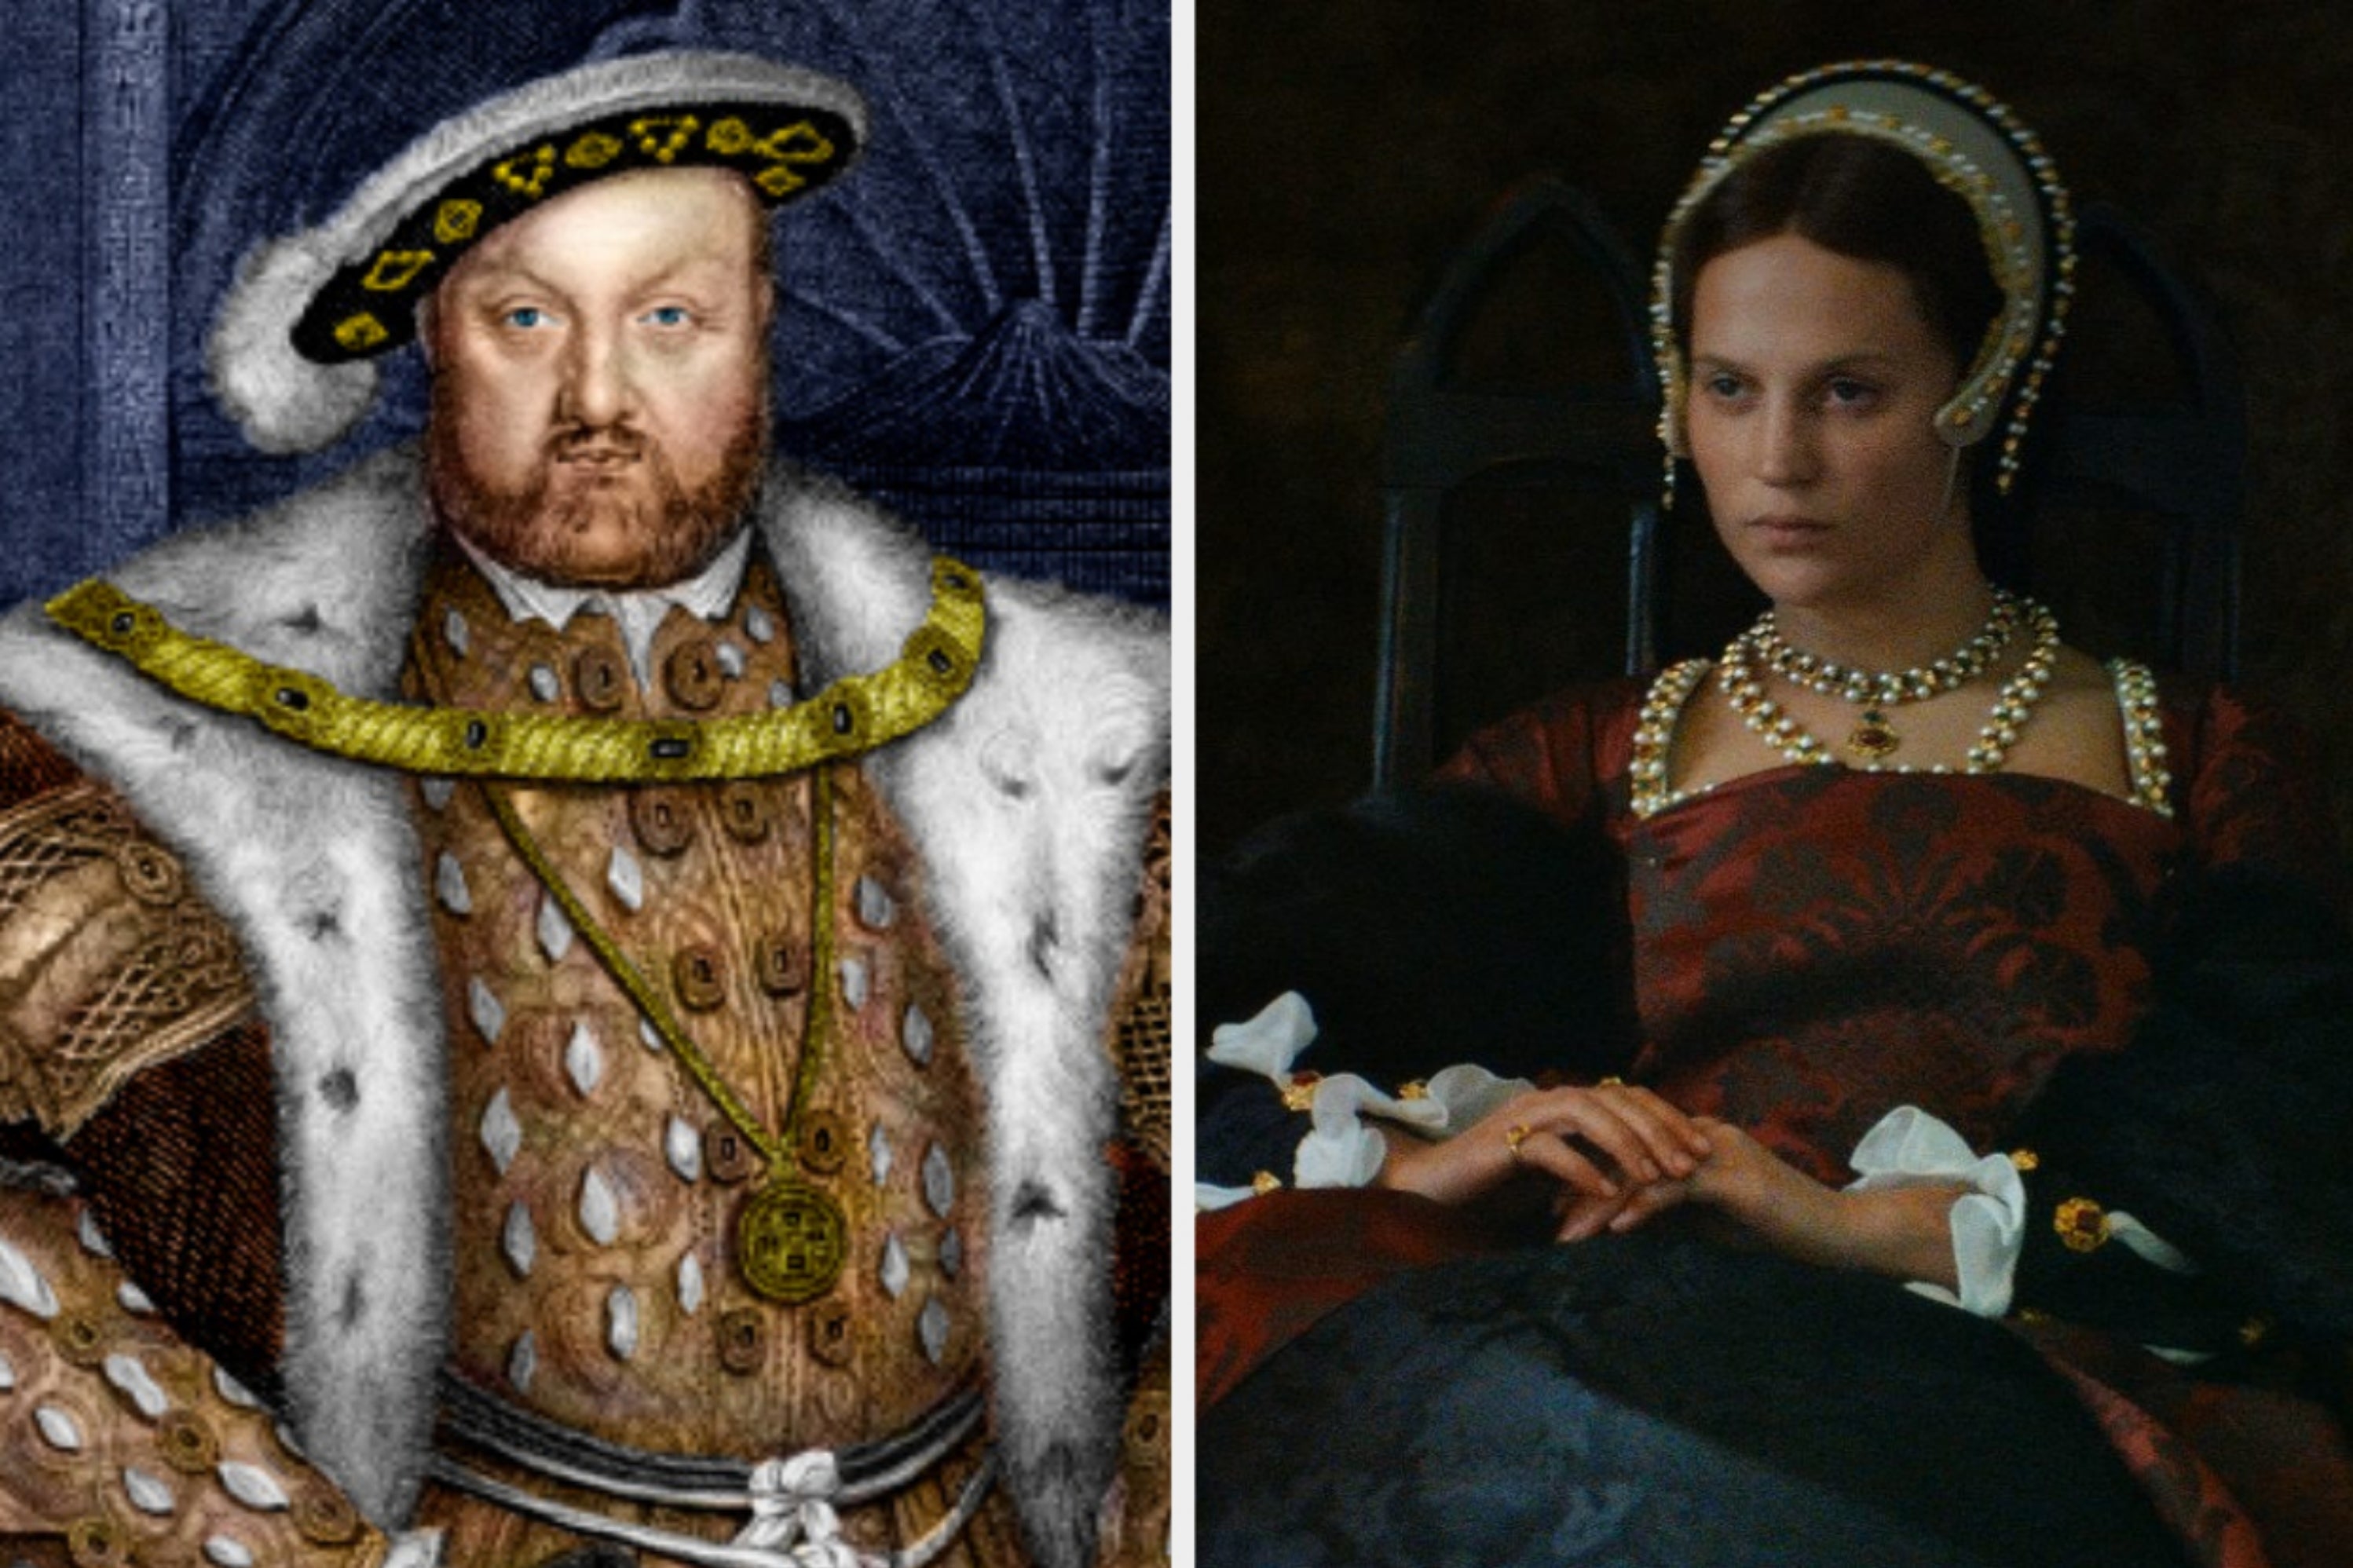 On the left, Henry VIII staring ahead and wearing a regal hat, and on the right, Alicia Vikander posing with her hands clasped in front of her as Catherine Parr in Firebrand